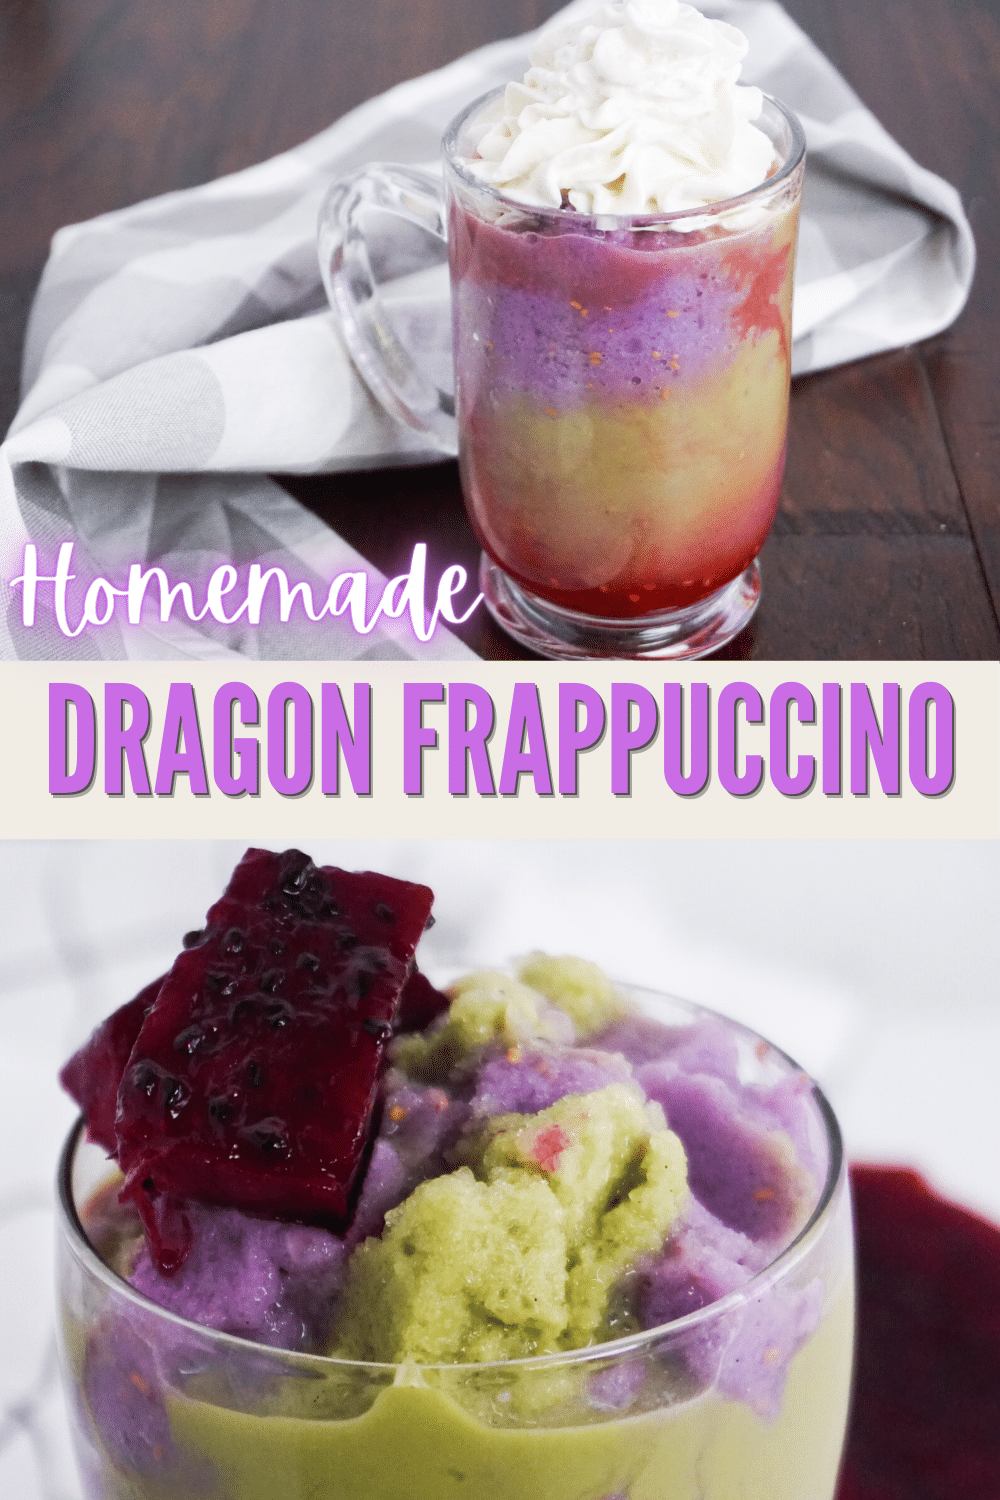 a collage of 2 images of Dragon Frappuccino in a mug and a glass